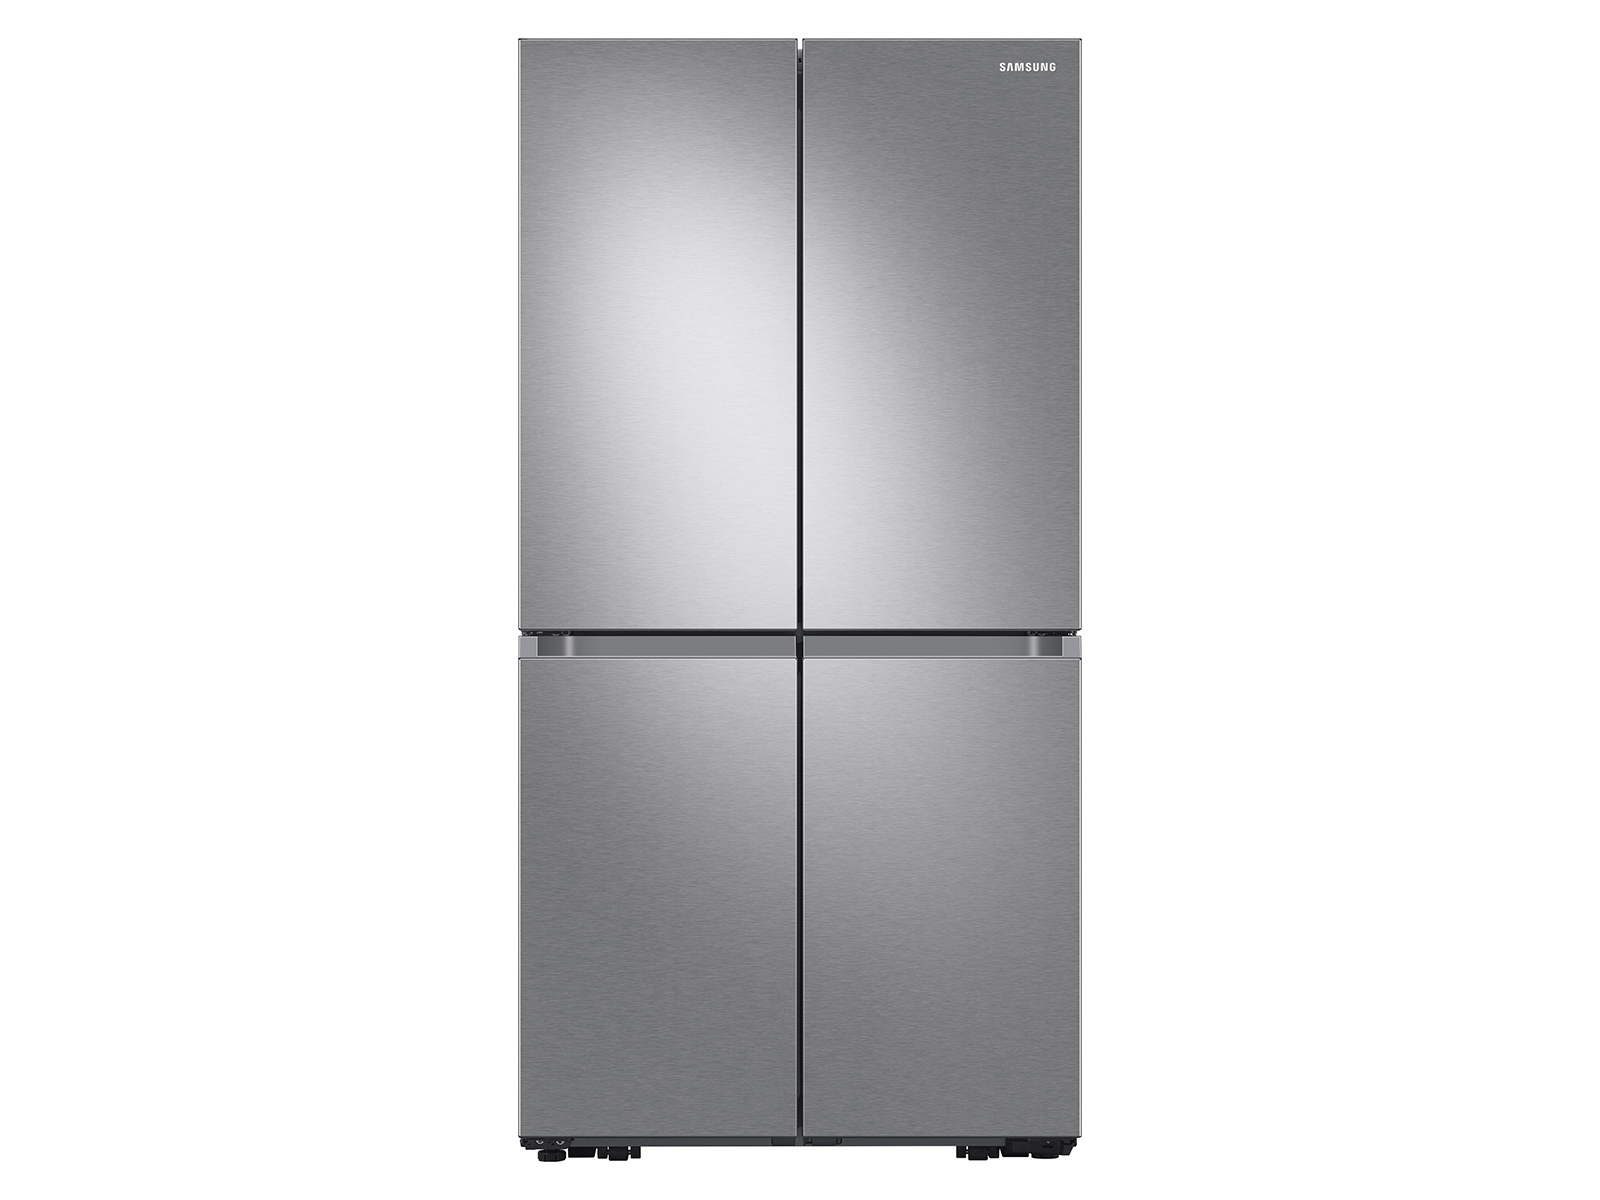 23 cu. ft. Smart Counter Depth 4-Door FlexTM refrigerator with AutoFill Water Pitcher and Dual Ice Maker in Stainless Steel